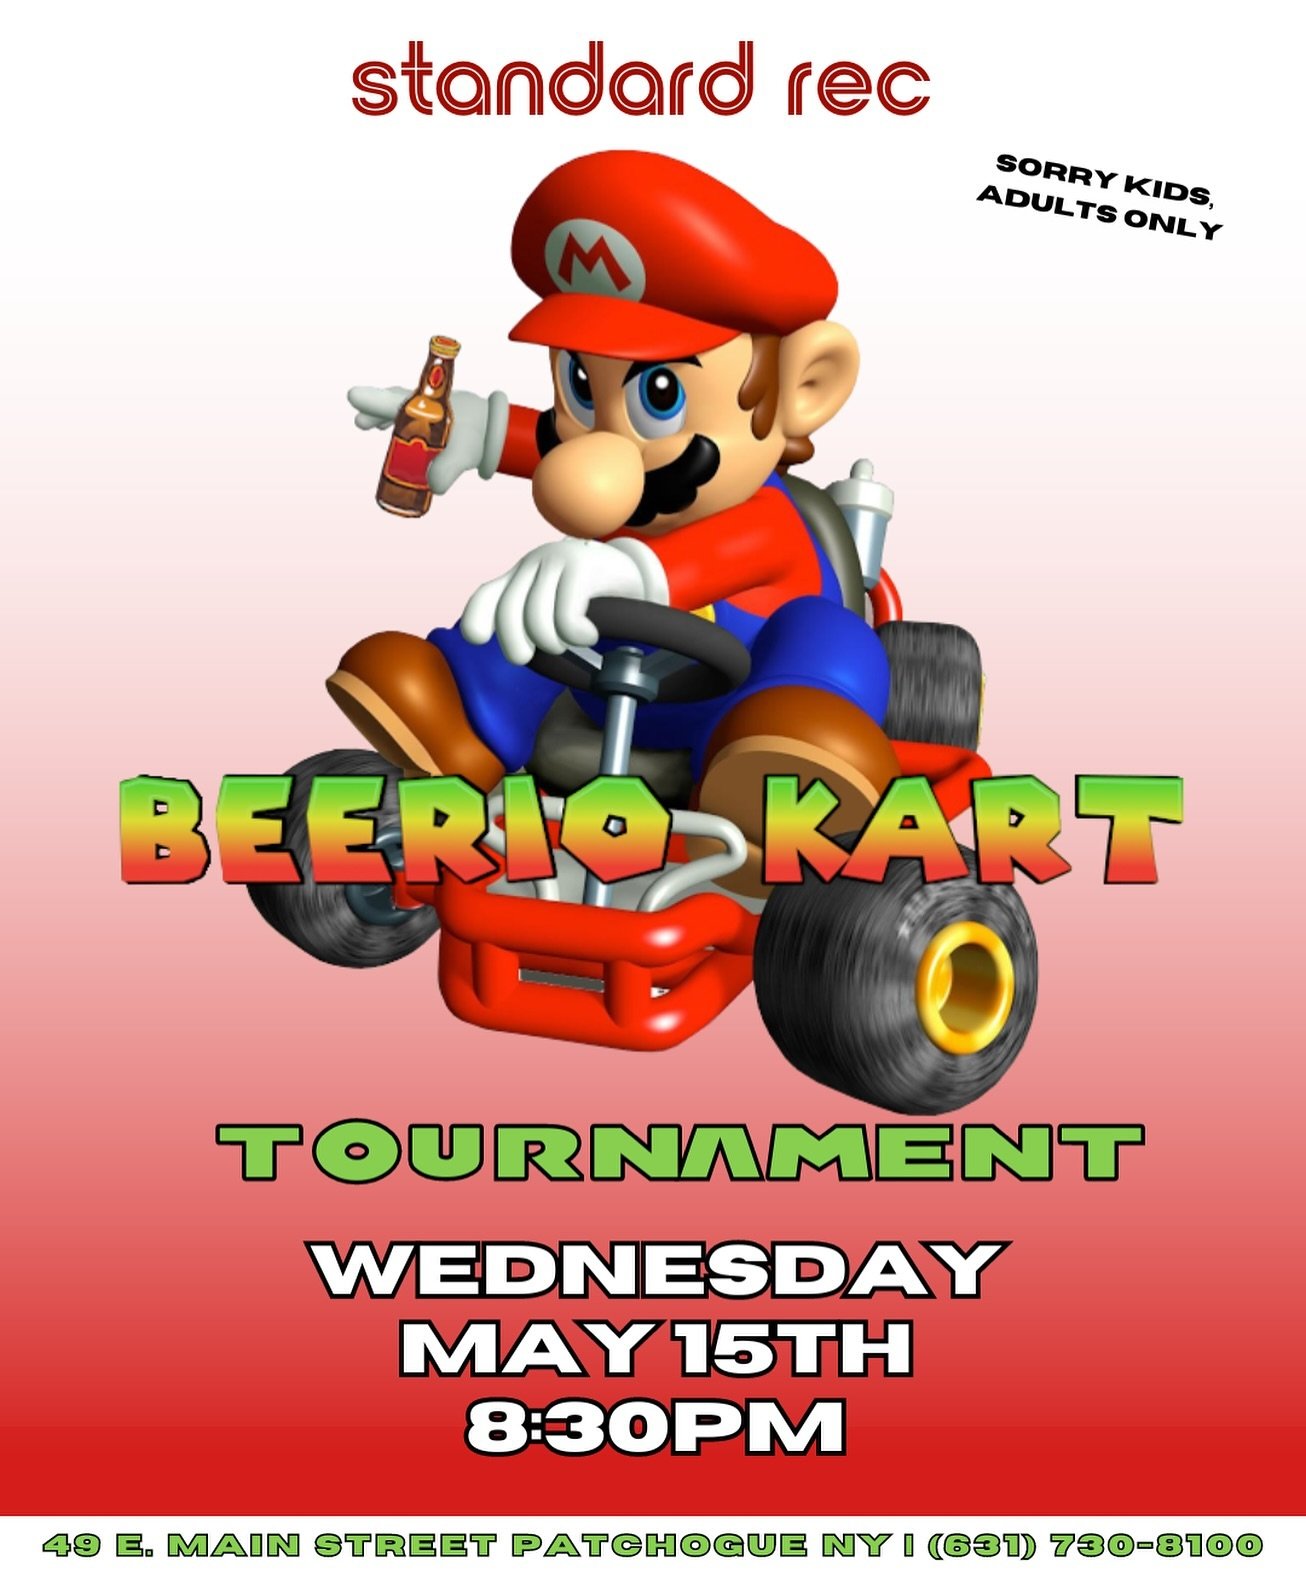 🏁 START YOUR ENGINES, BEERIOKART is coming 👀 🏁🍻
When: Wednesday May 15th - 8:30PM🏎️
Where: Standard Rec - 49 East Main Street 🏁 
Entry Fee: 1 beer bucket of choice to cover your drinking, WHILE NOT DRIVING, needs 🦑
 &bull; MUST DM or call to s